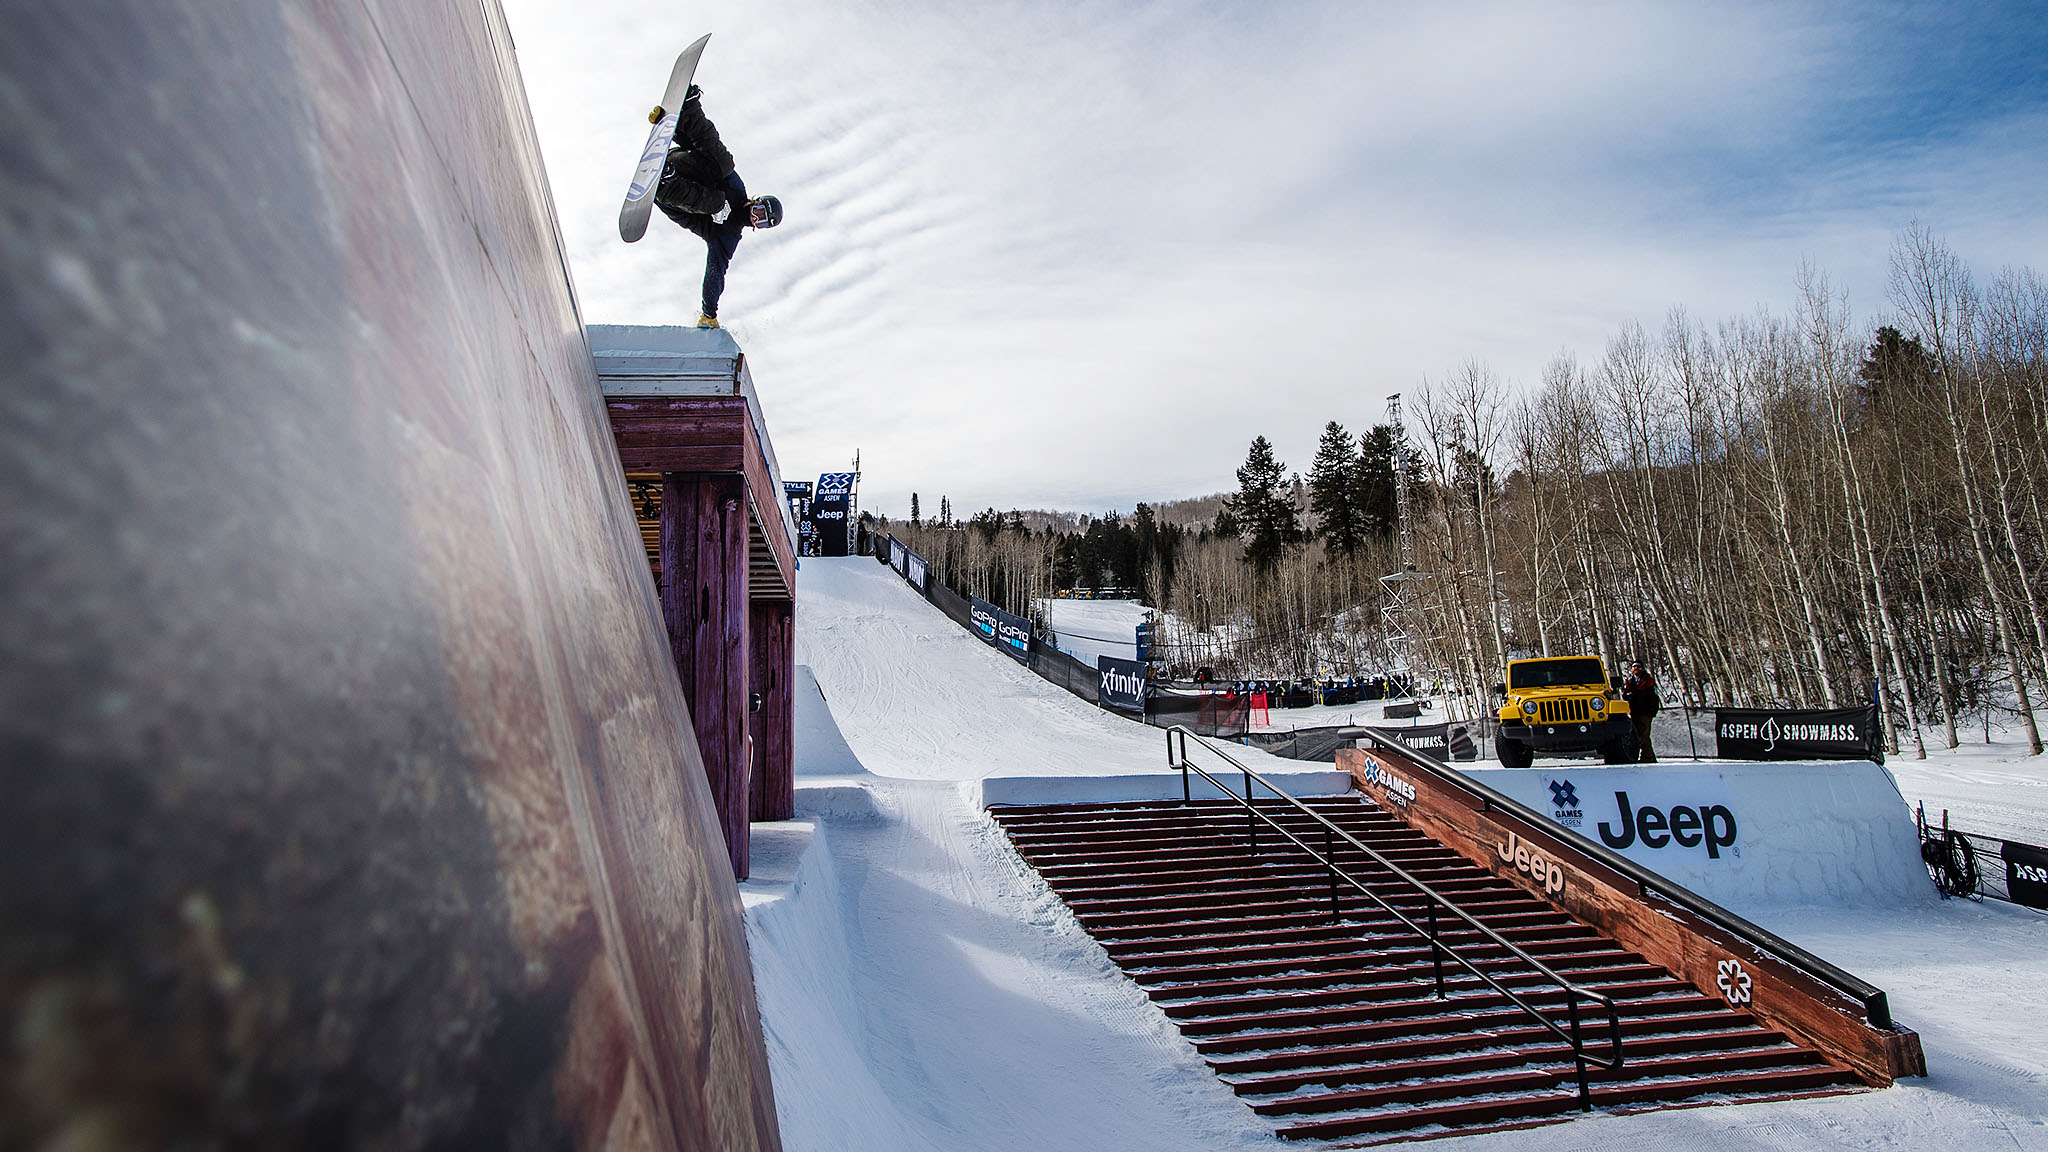 What to watch for at X Games Aspen 2016